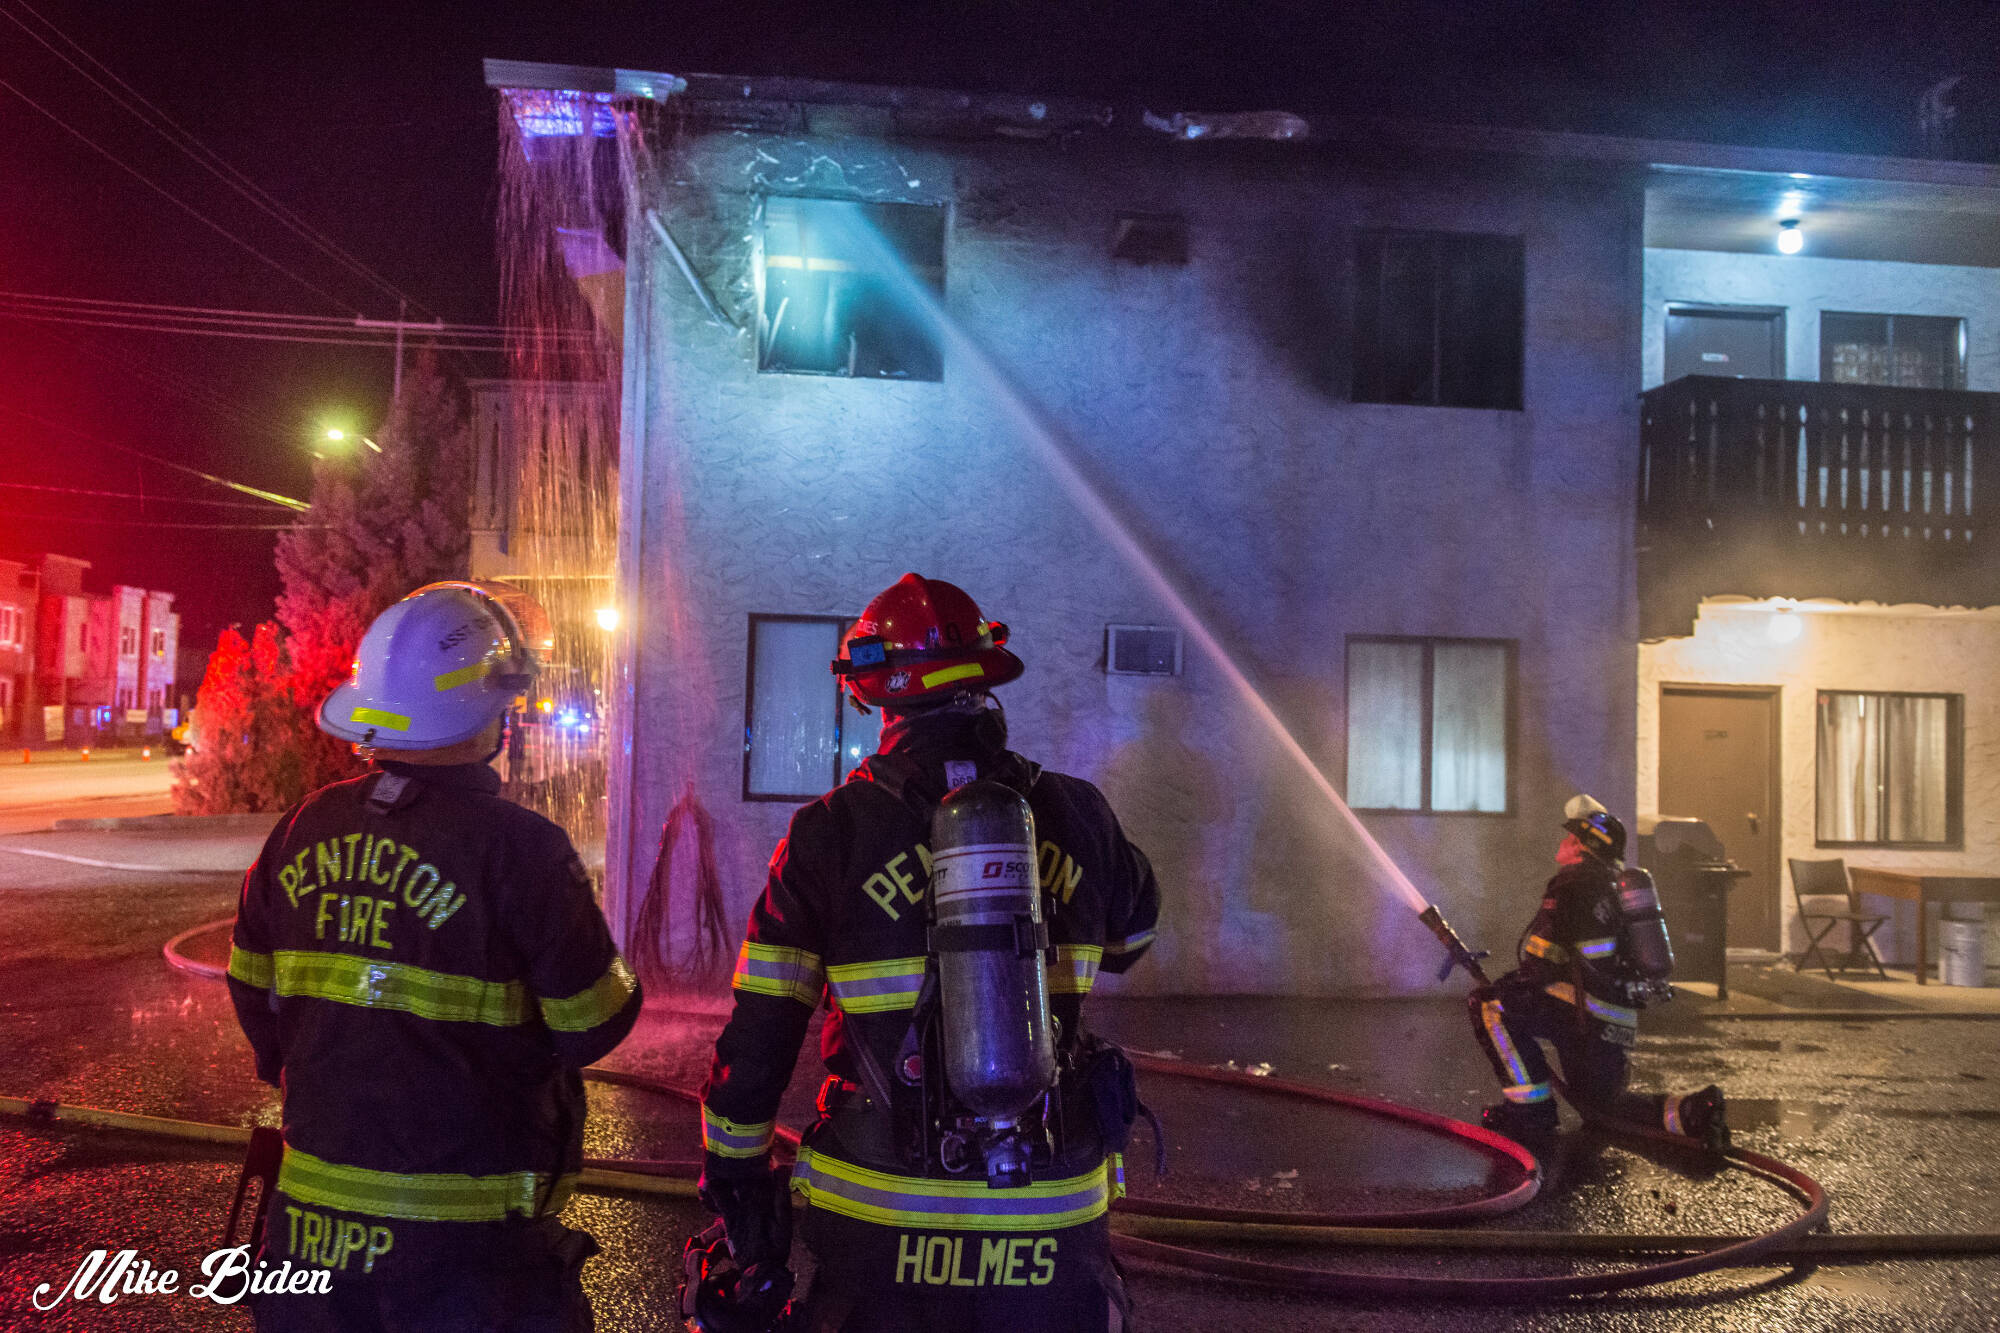 Penticton firefighters were able to contain a fire at the Black Forest Motel to one unit. (Mike Biden photo)